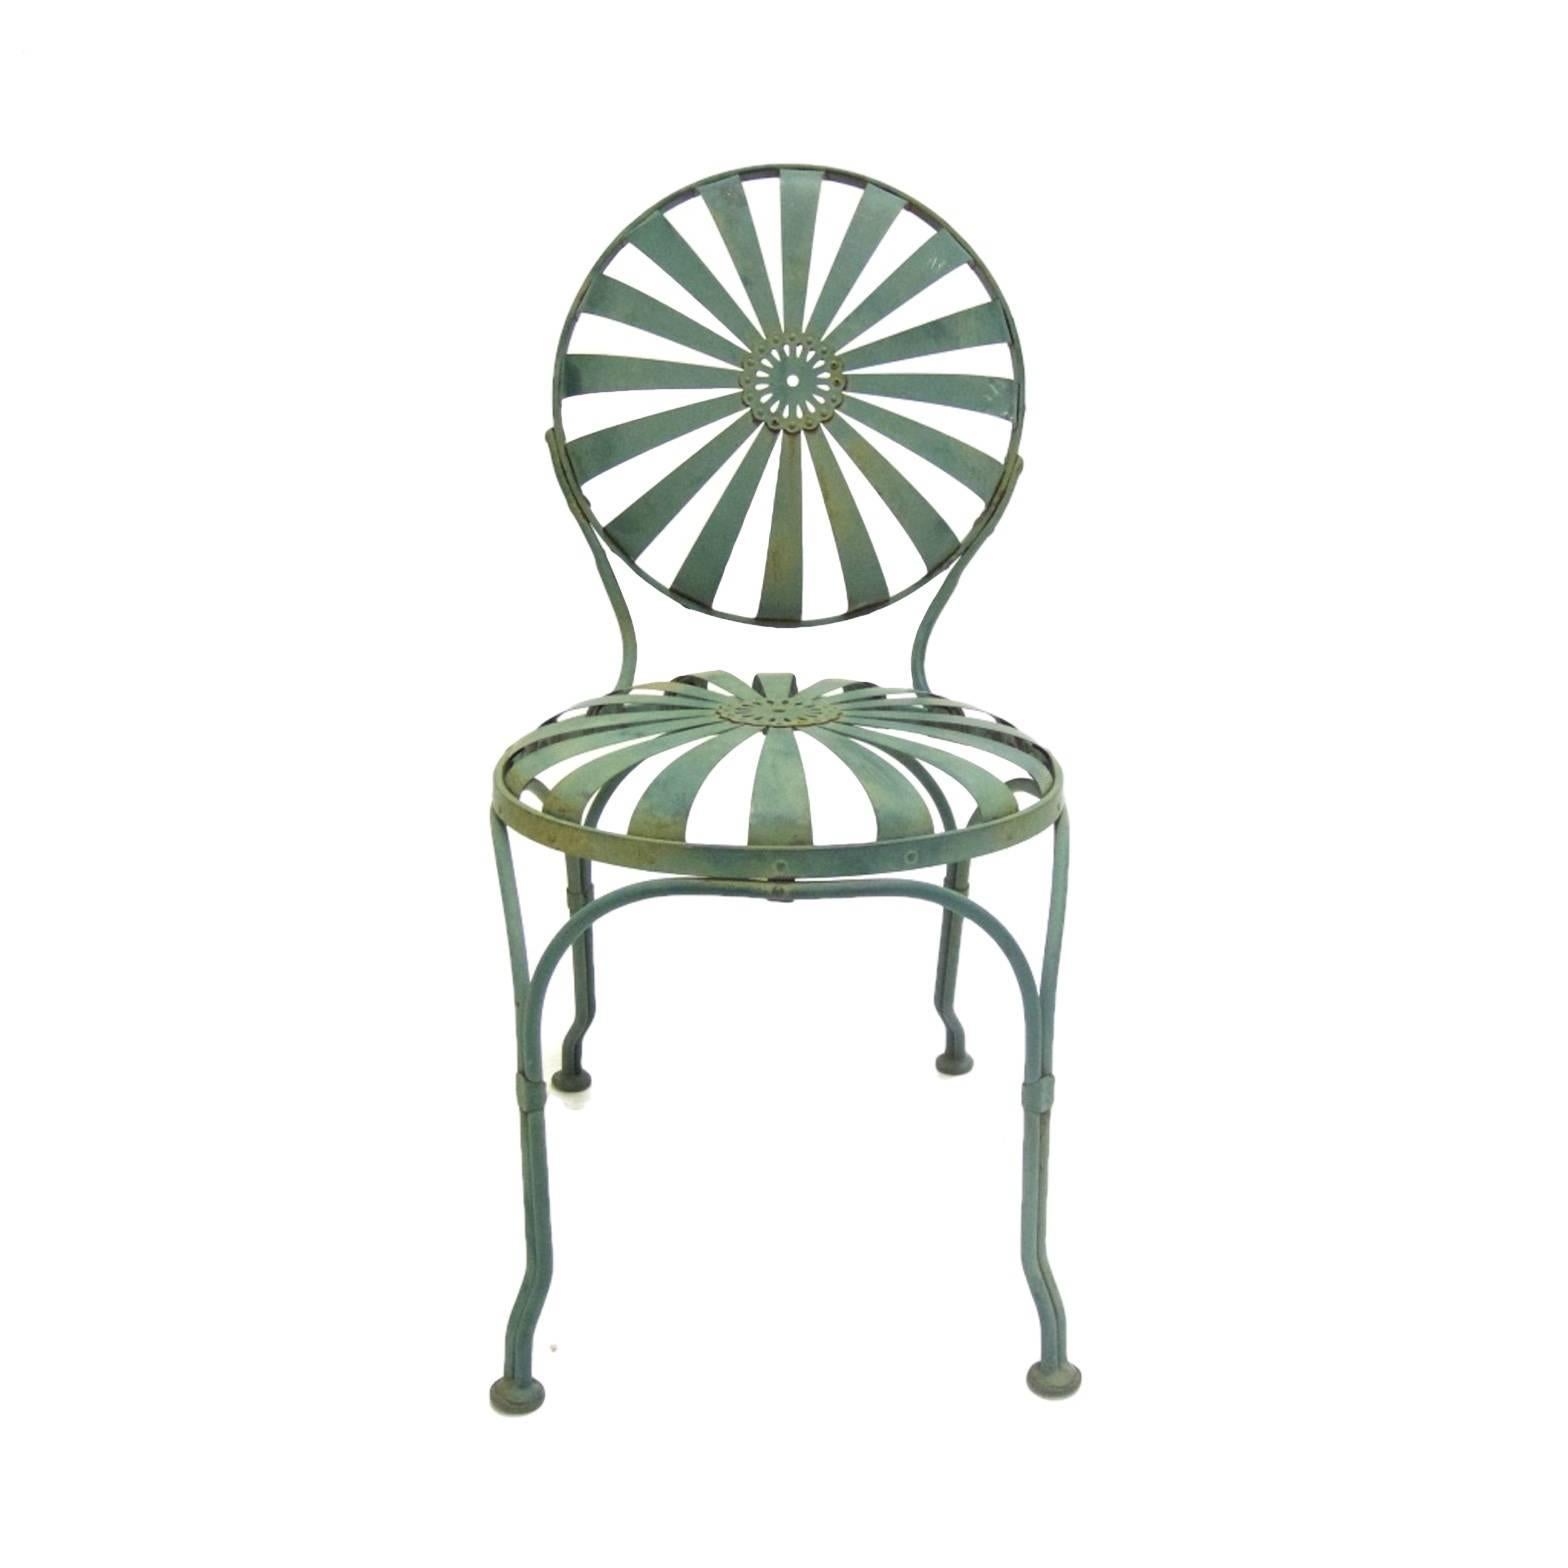 Art Deco Francois Carre Sunburst French Green Outdoor Garden or Patio Chairs